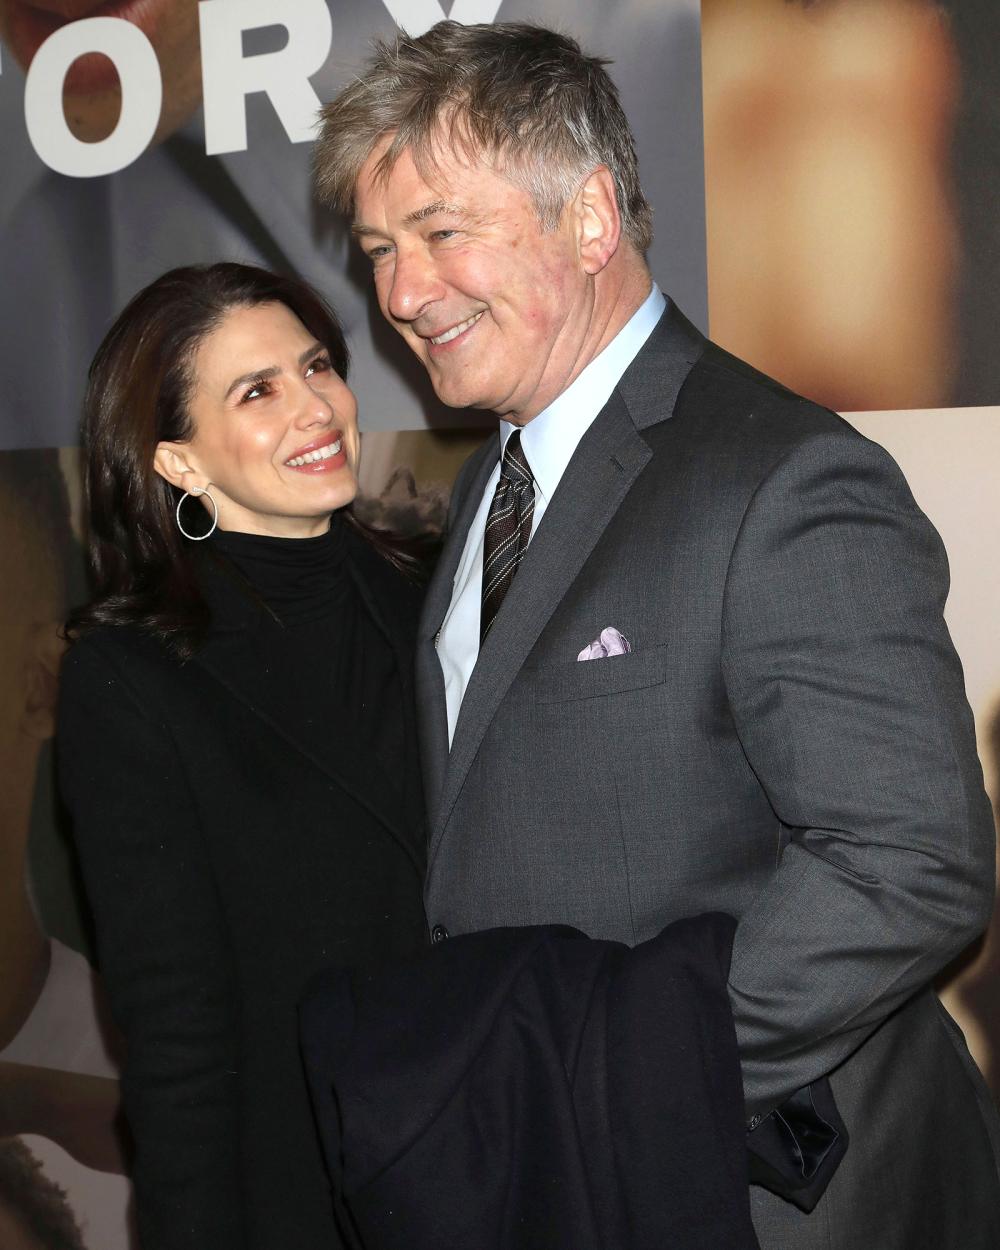 Hilaria Baldwinv Previously Judged Couples With Big Age Differences Before Meeting Alec Baldwin 2